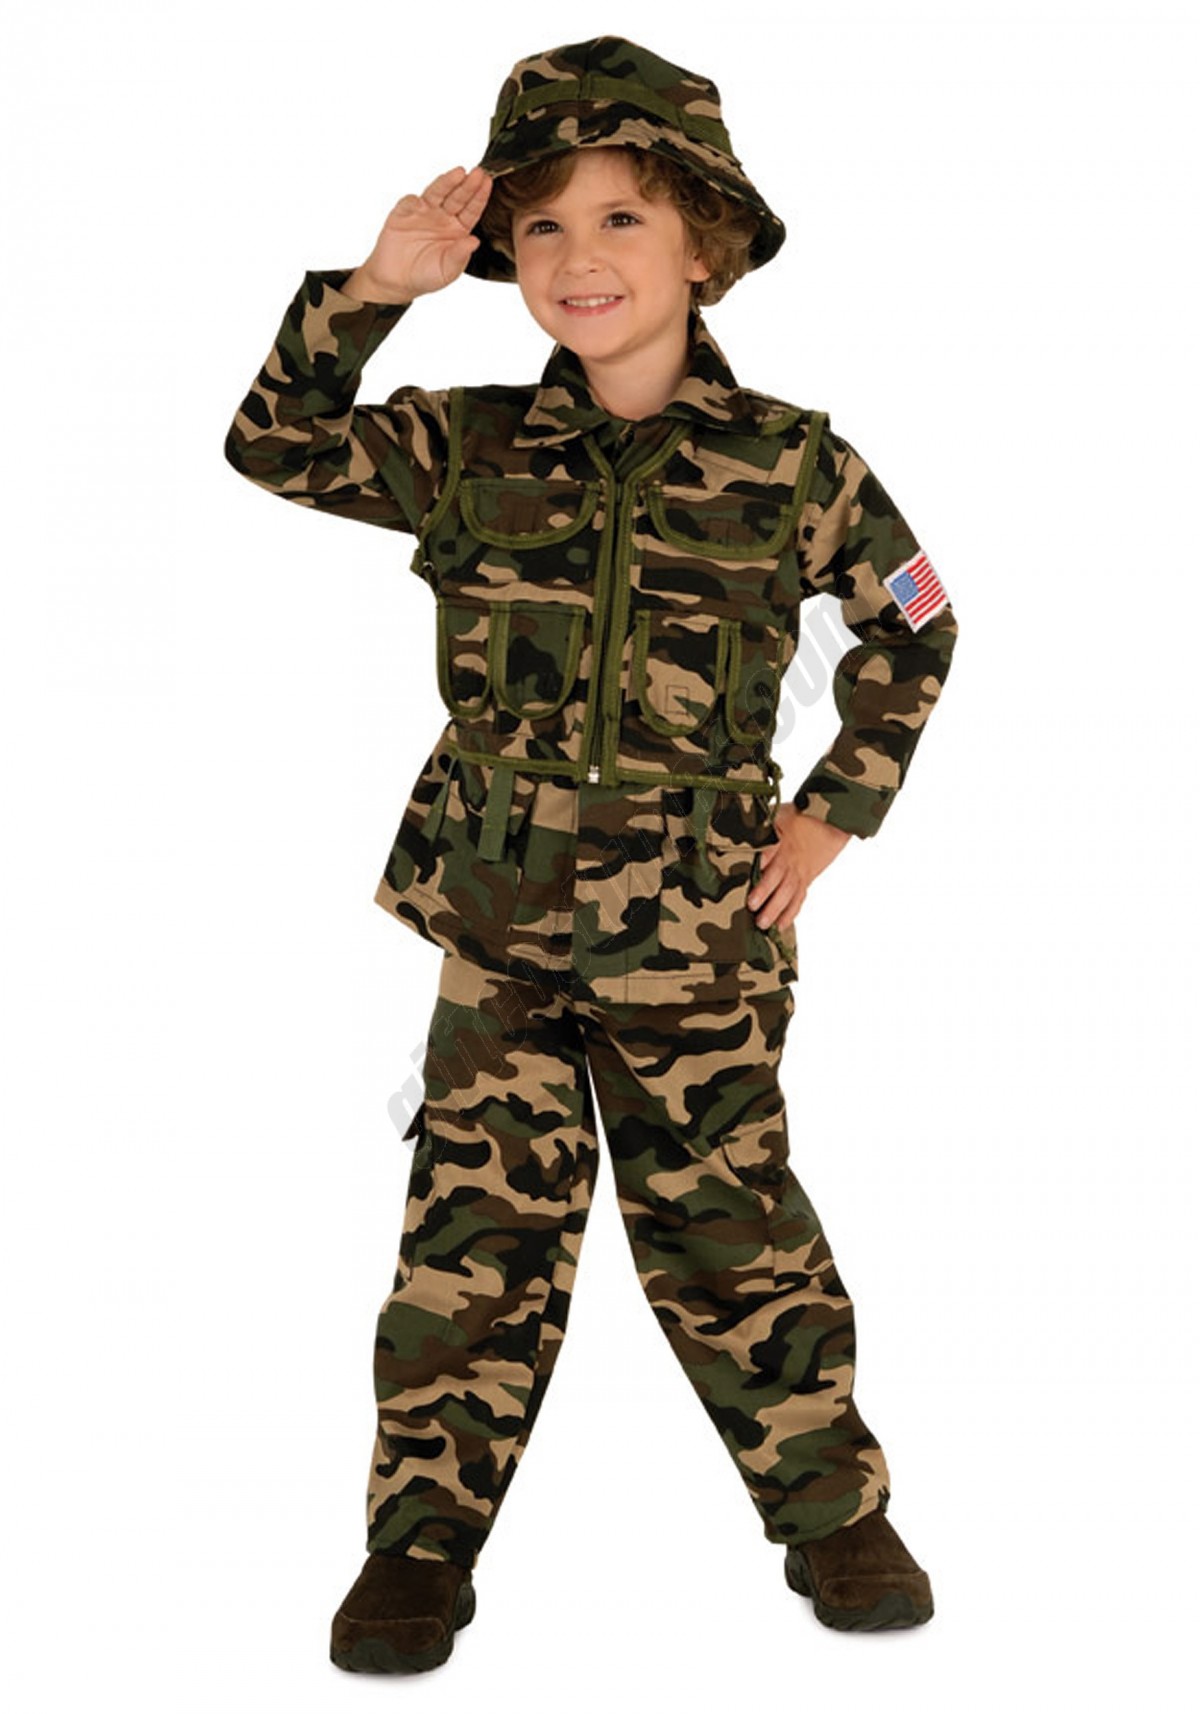 Toddler Army Costume Promotions - -0